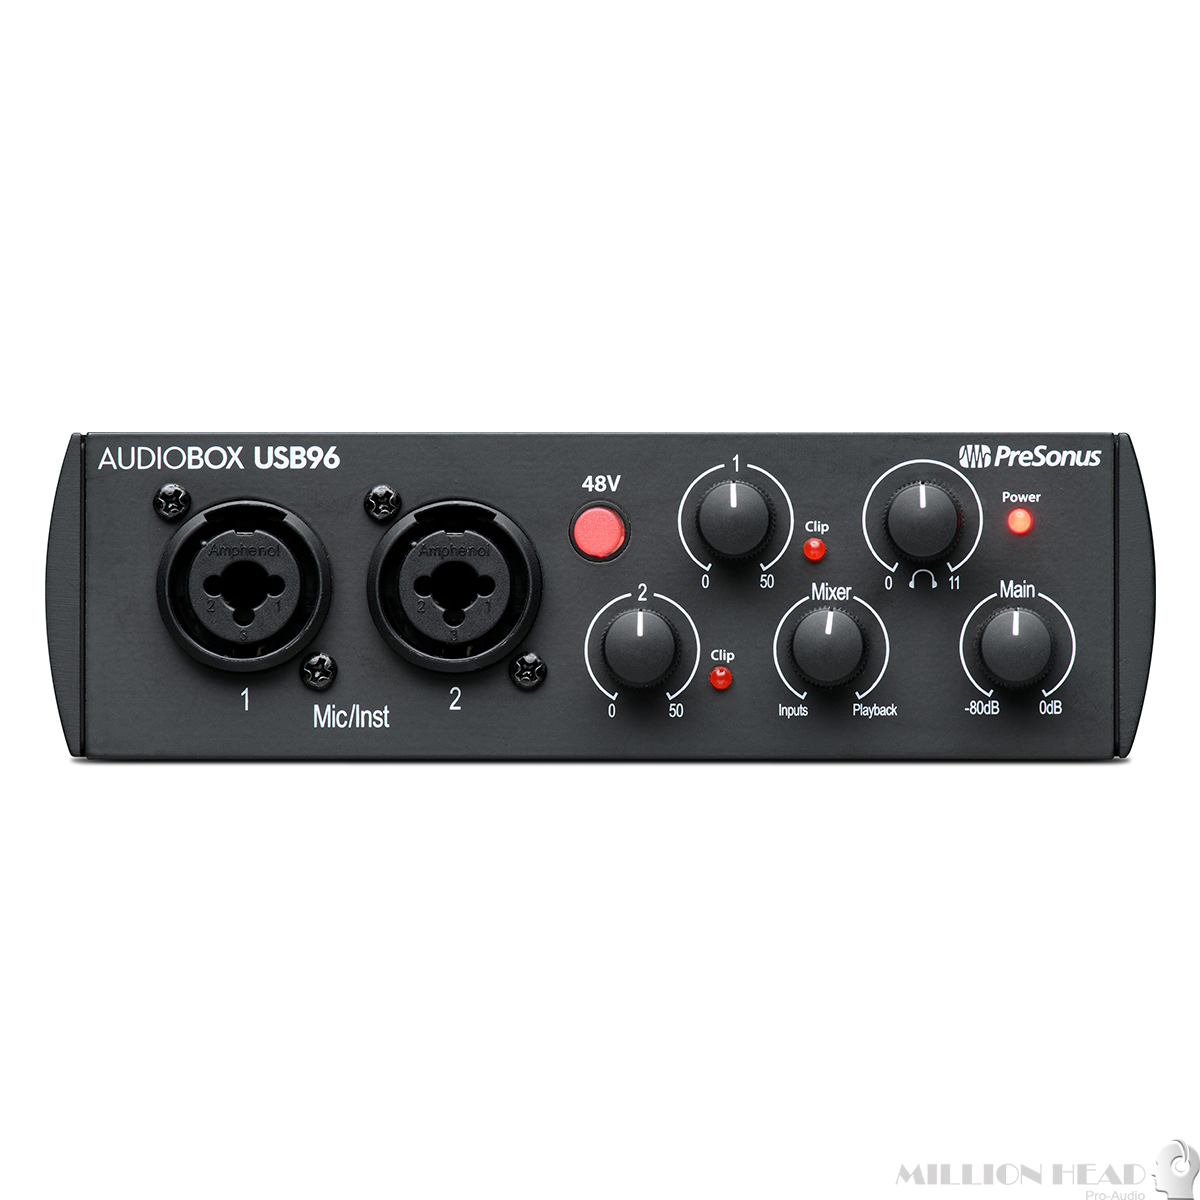 Usb Audio Interface 24bit/96khz For Recording Podcasting And